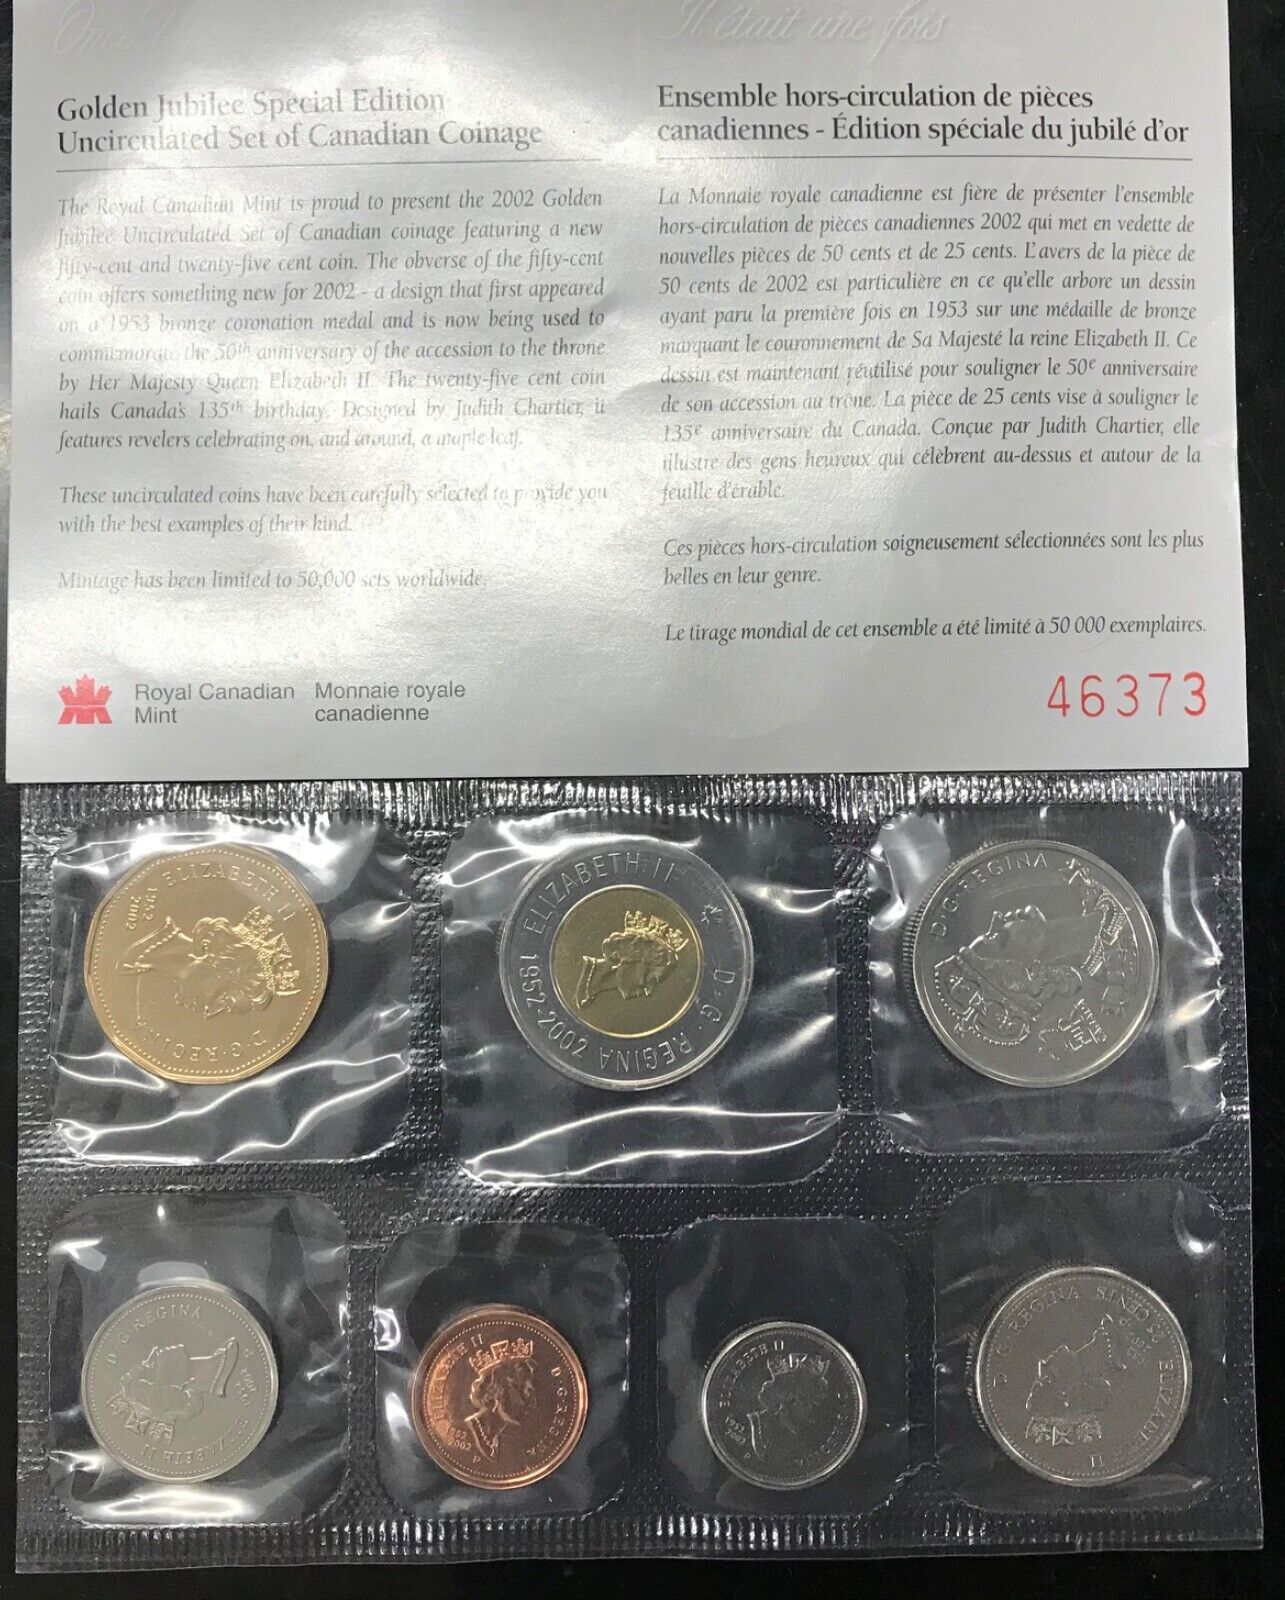 2002 Royal Canadian Mint Golden Jubilee Uncirculated Set, 7 coins 1 cent to $2